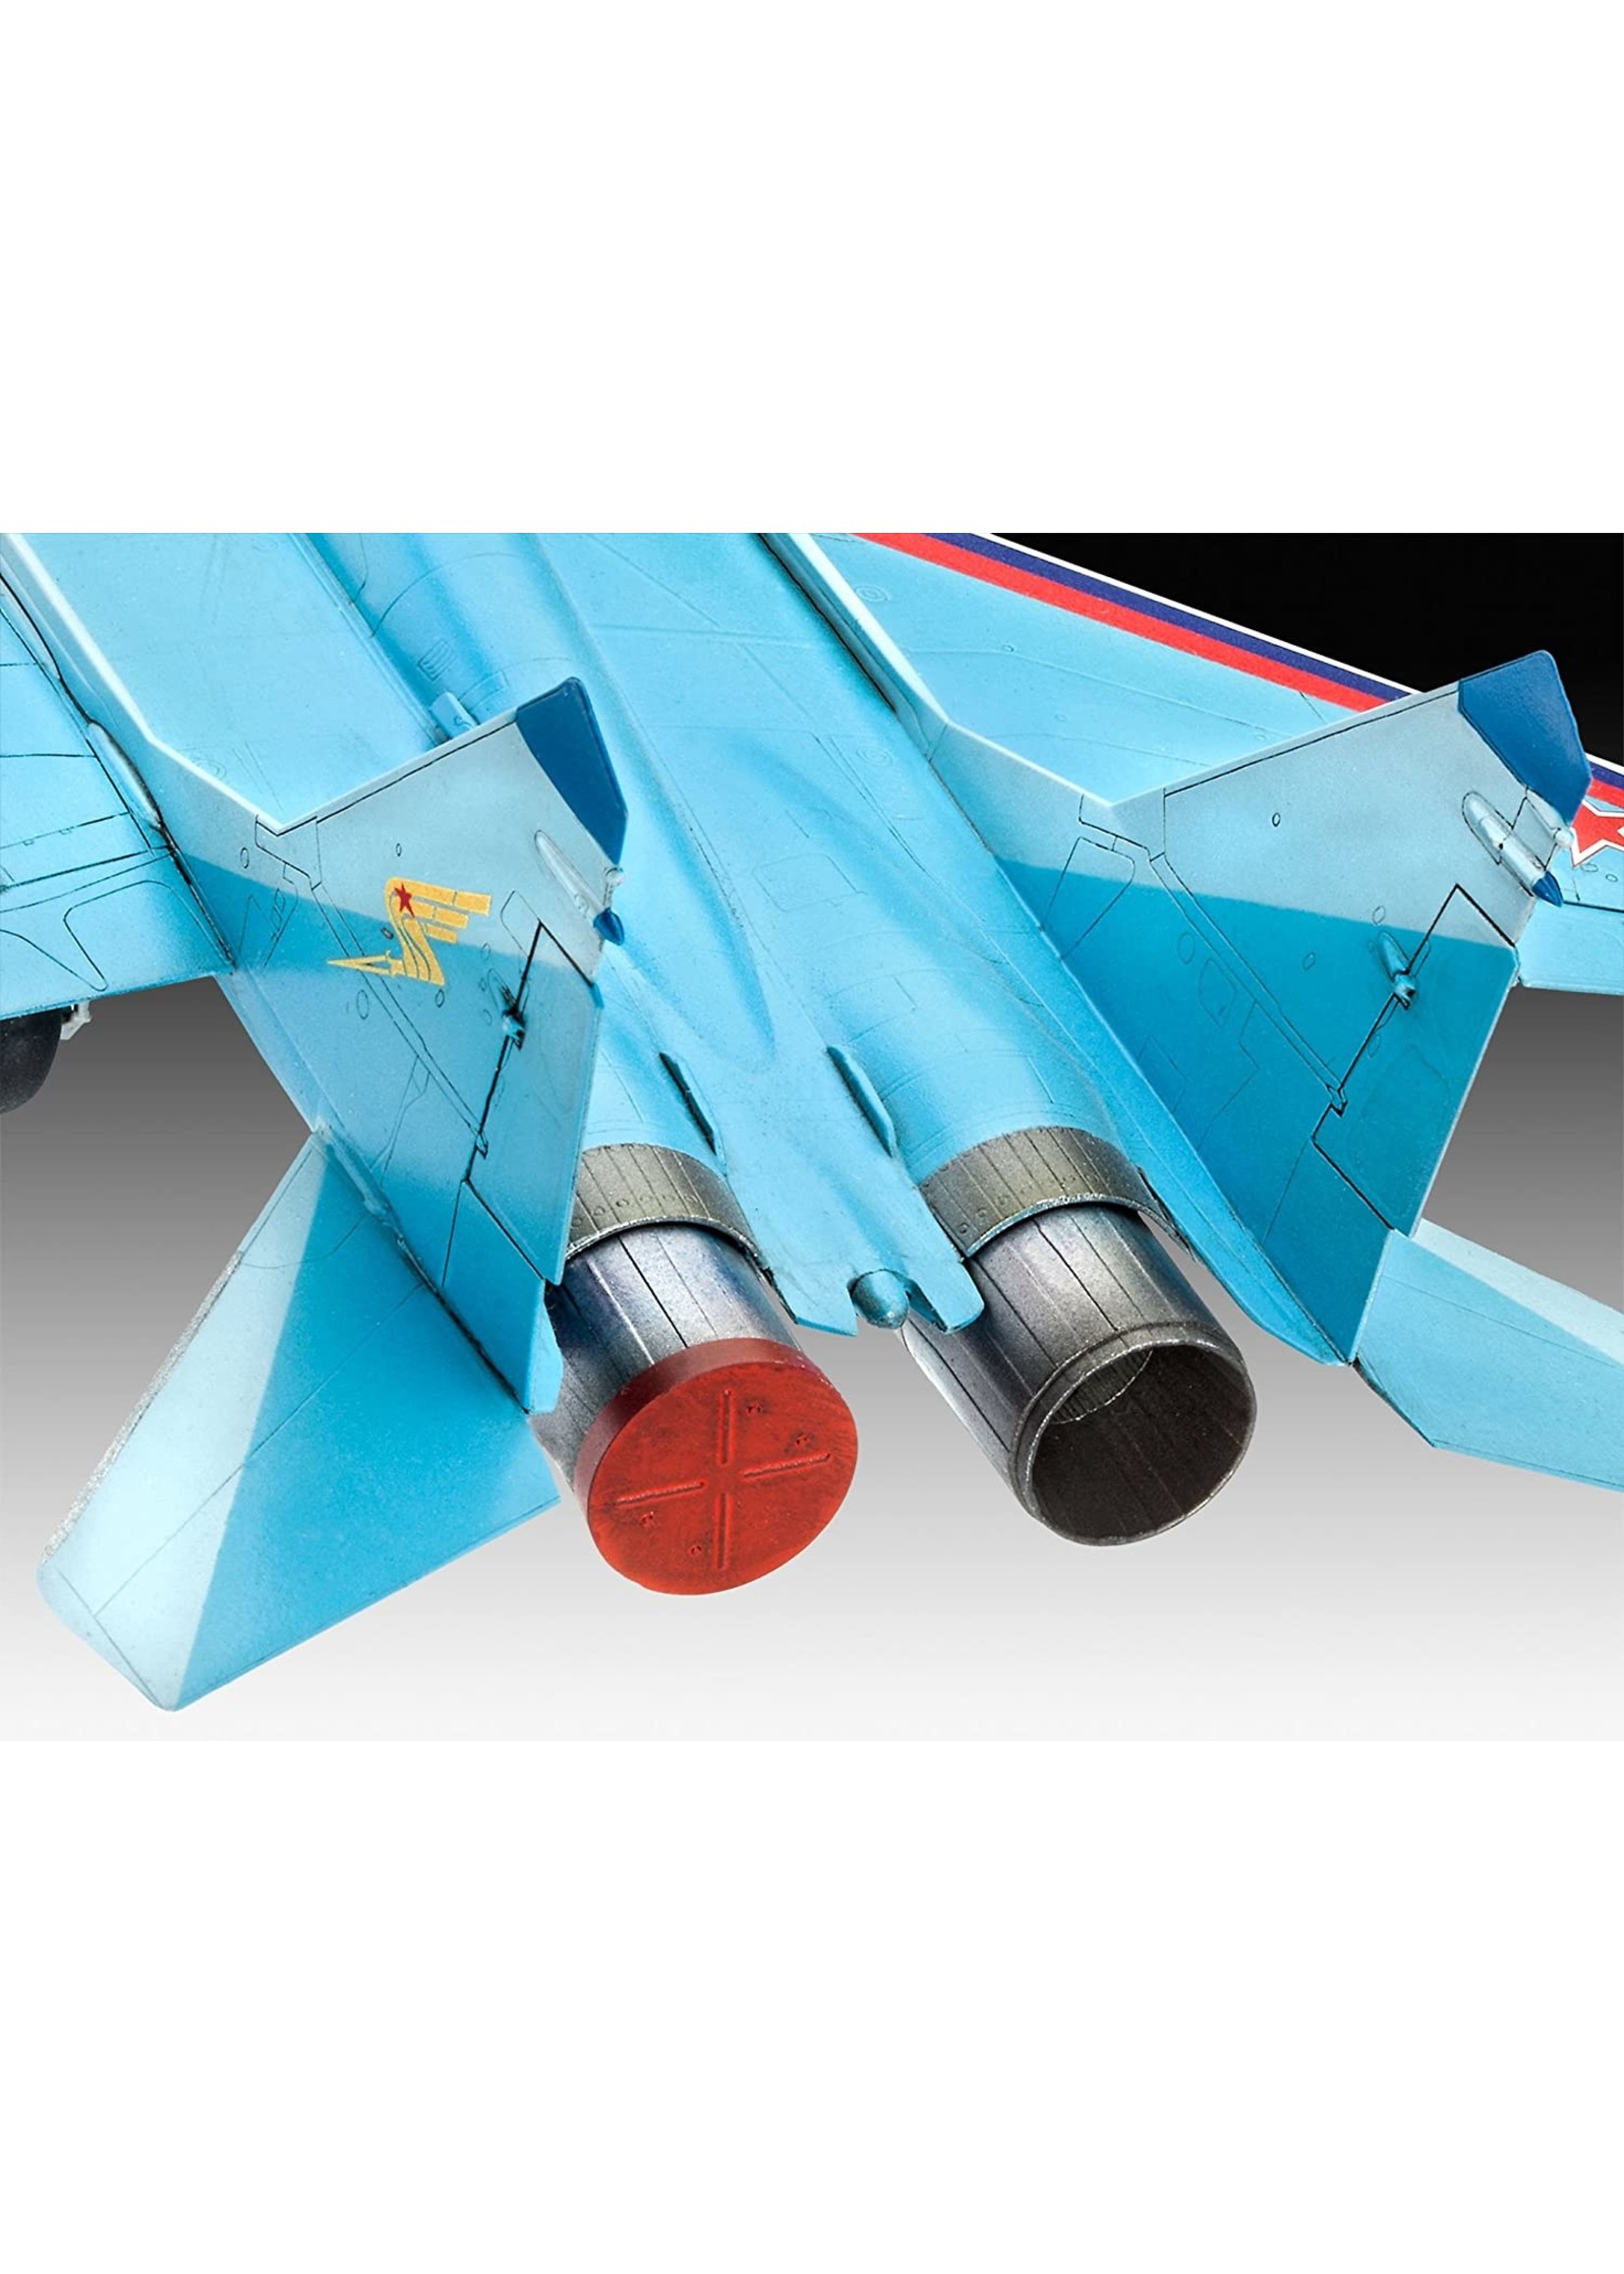 Revell of Germany 03936 - 1/72 MiG-29S Fulcrum